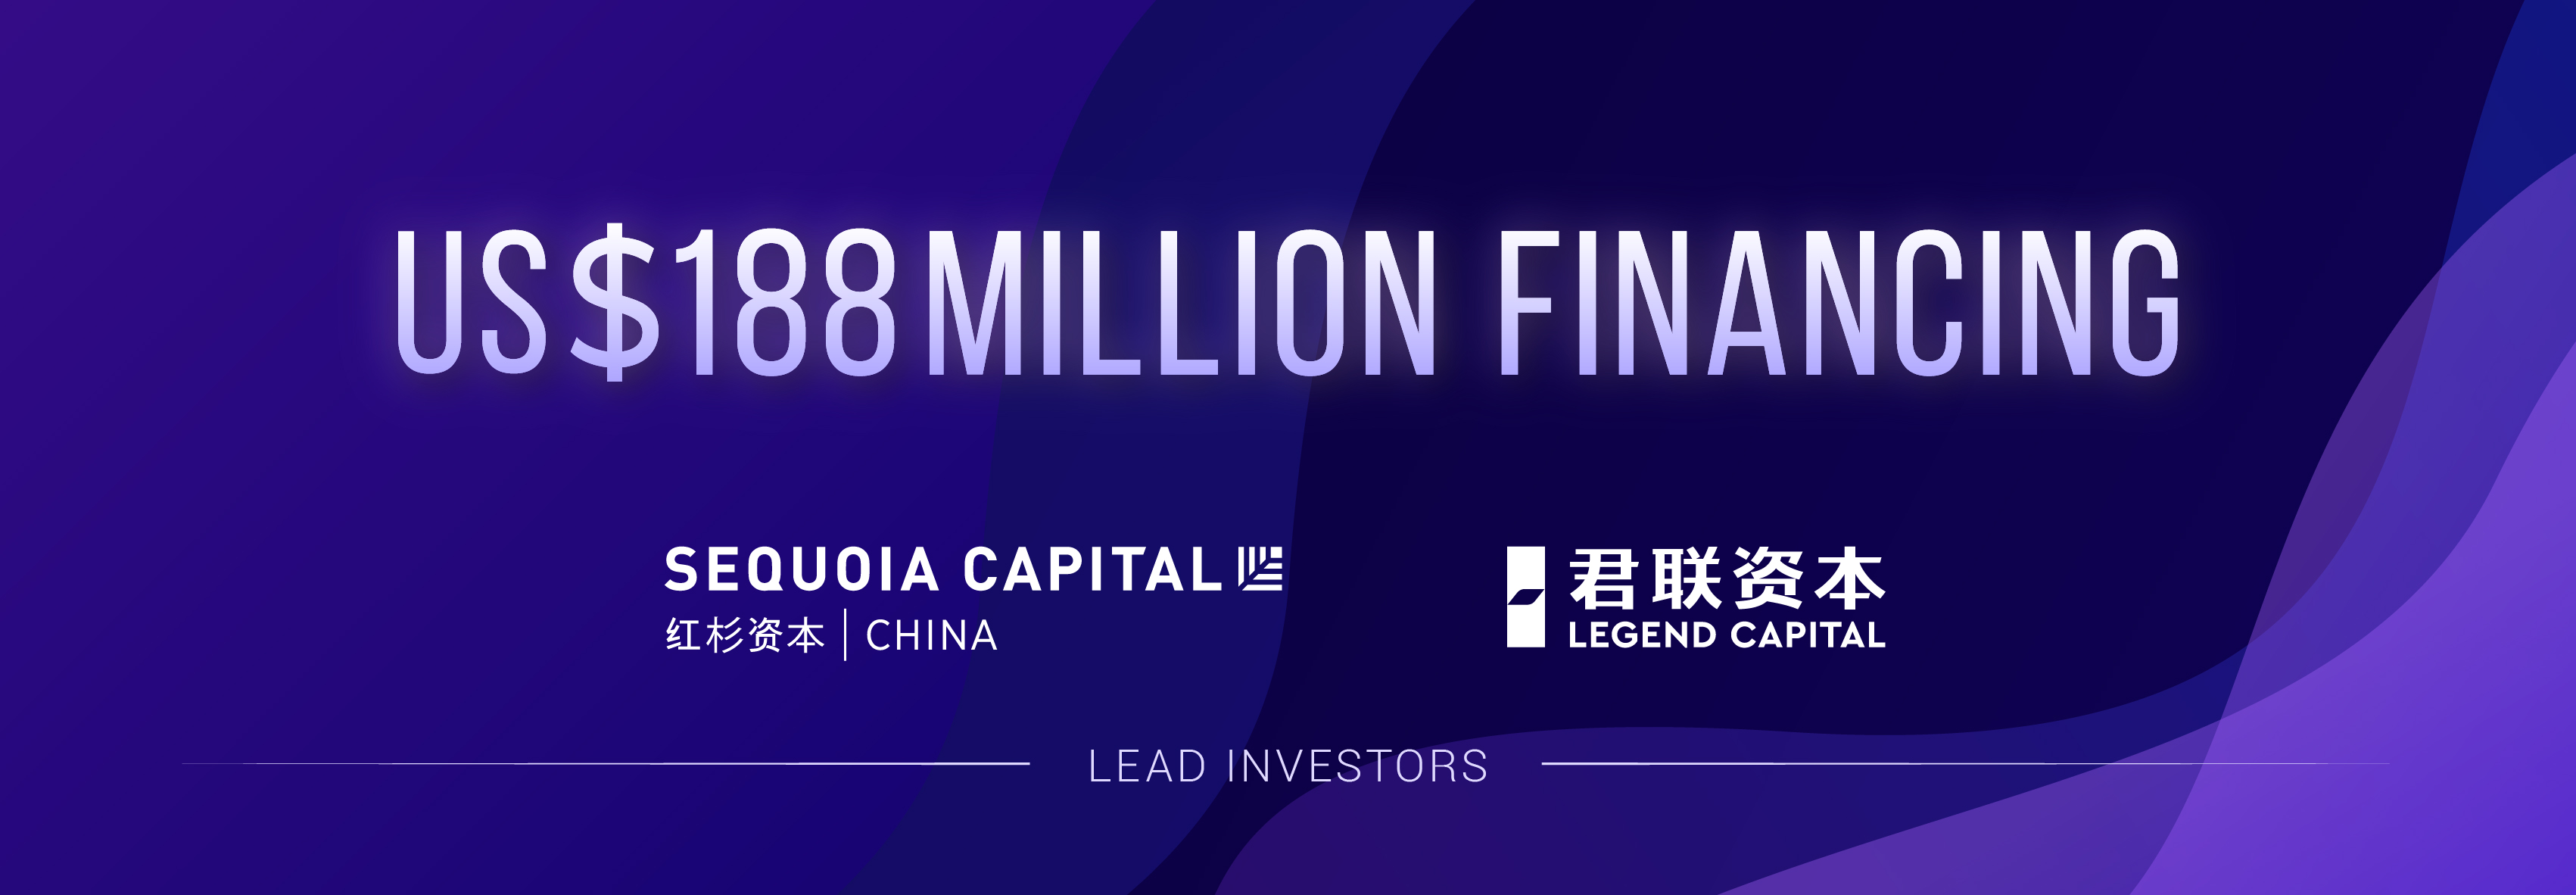 Inceptio Technology completes US$188 million in financing, led by Sequoia Capital China and Legend Capital